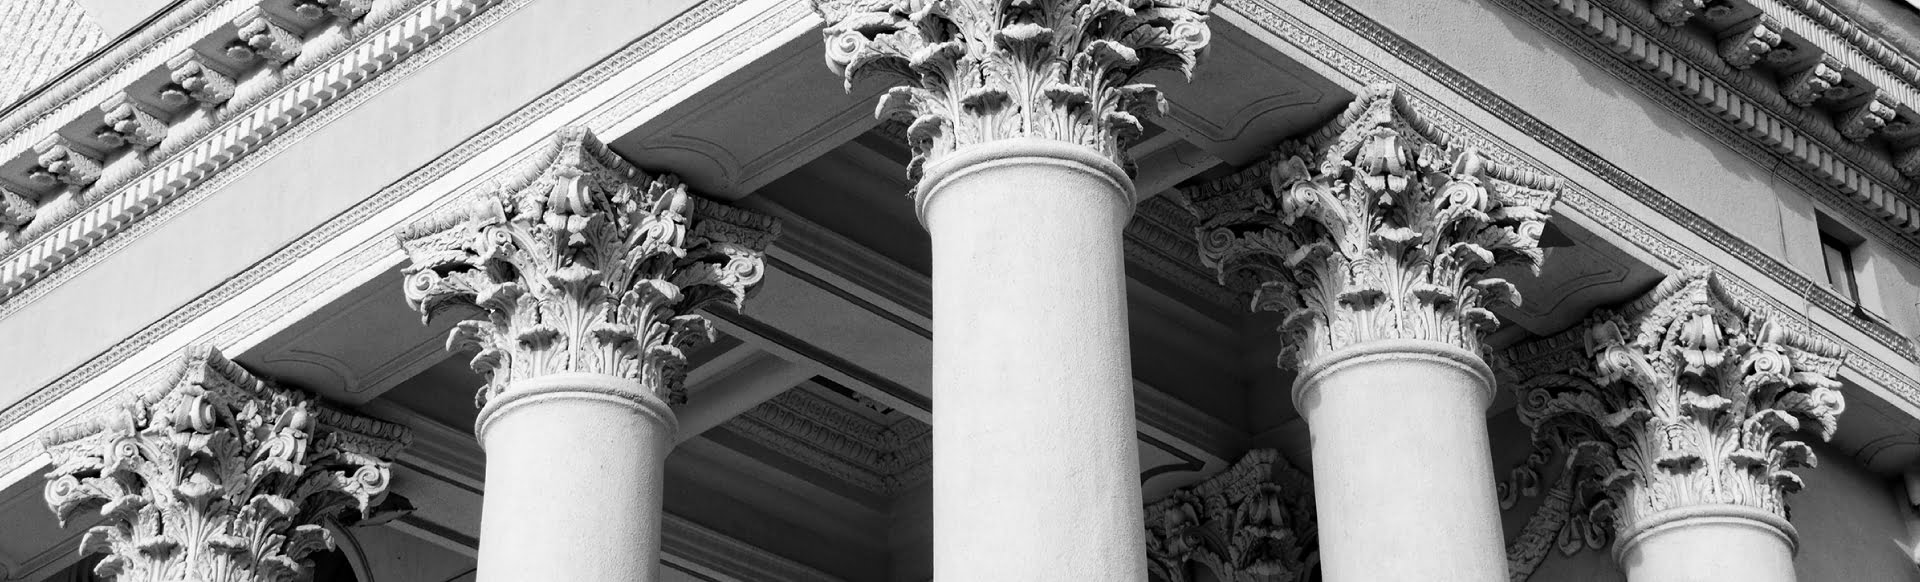 classic design on building pillars typical of a courthouse